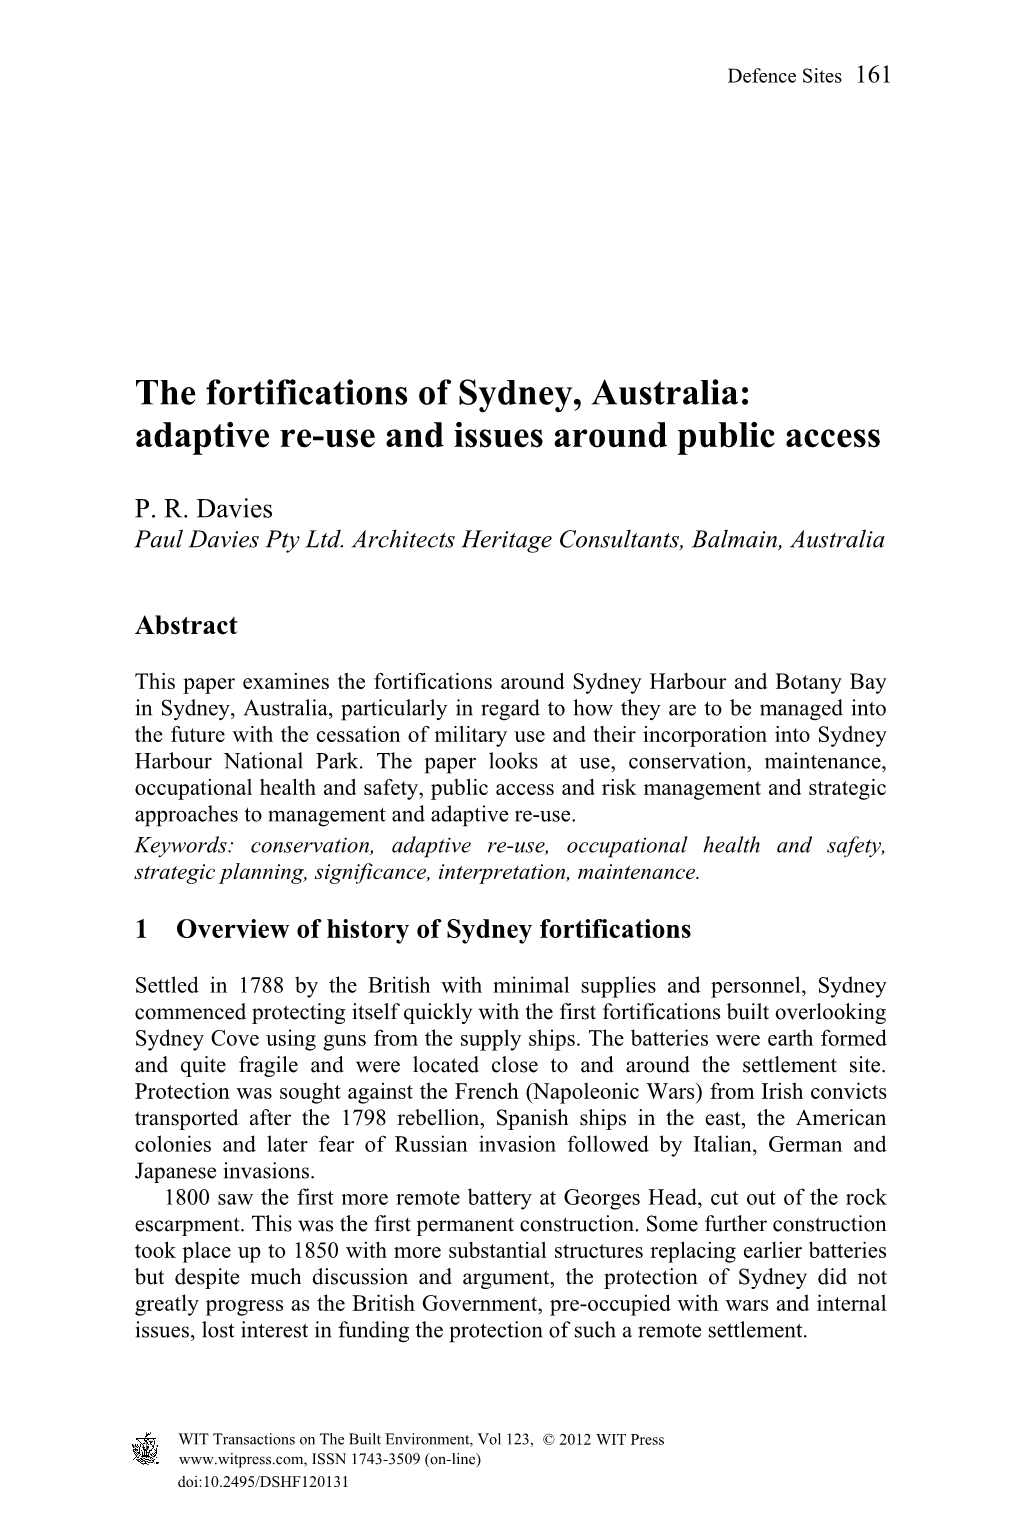 The Fortifications of Sydney, Australia: Adaptive Re-Use and Issues Around Public Access